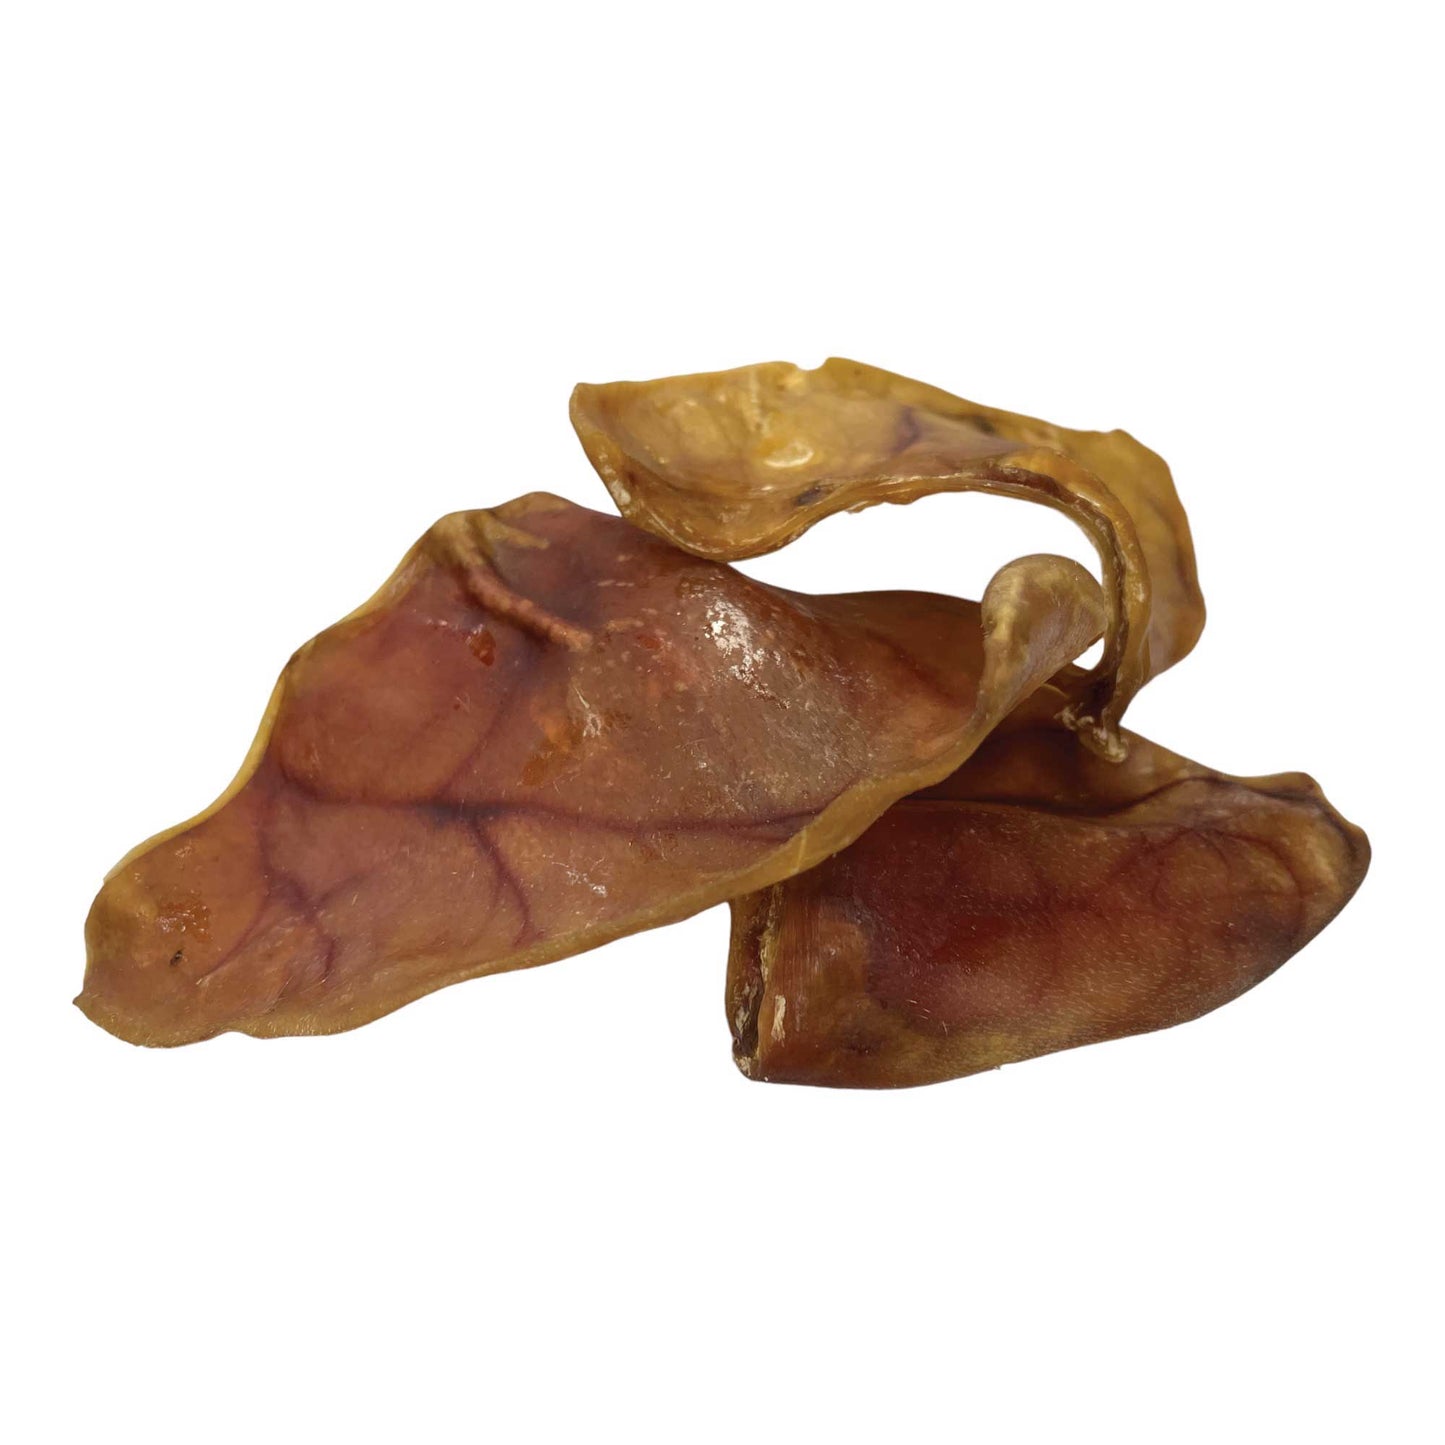 25x Dog Treat Large Pig Ears Whole  - Dehydrated Australian Healthy Puppy Chew